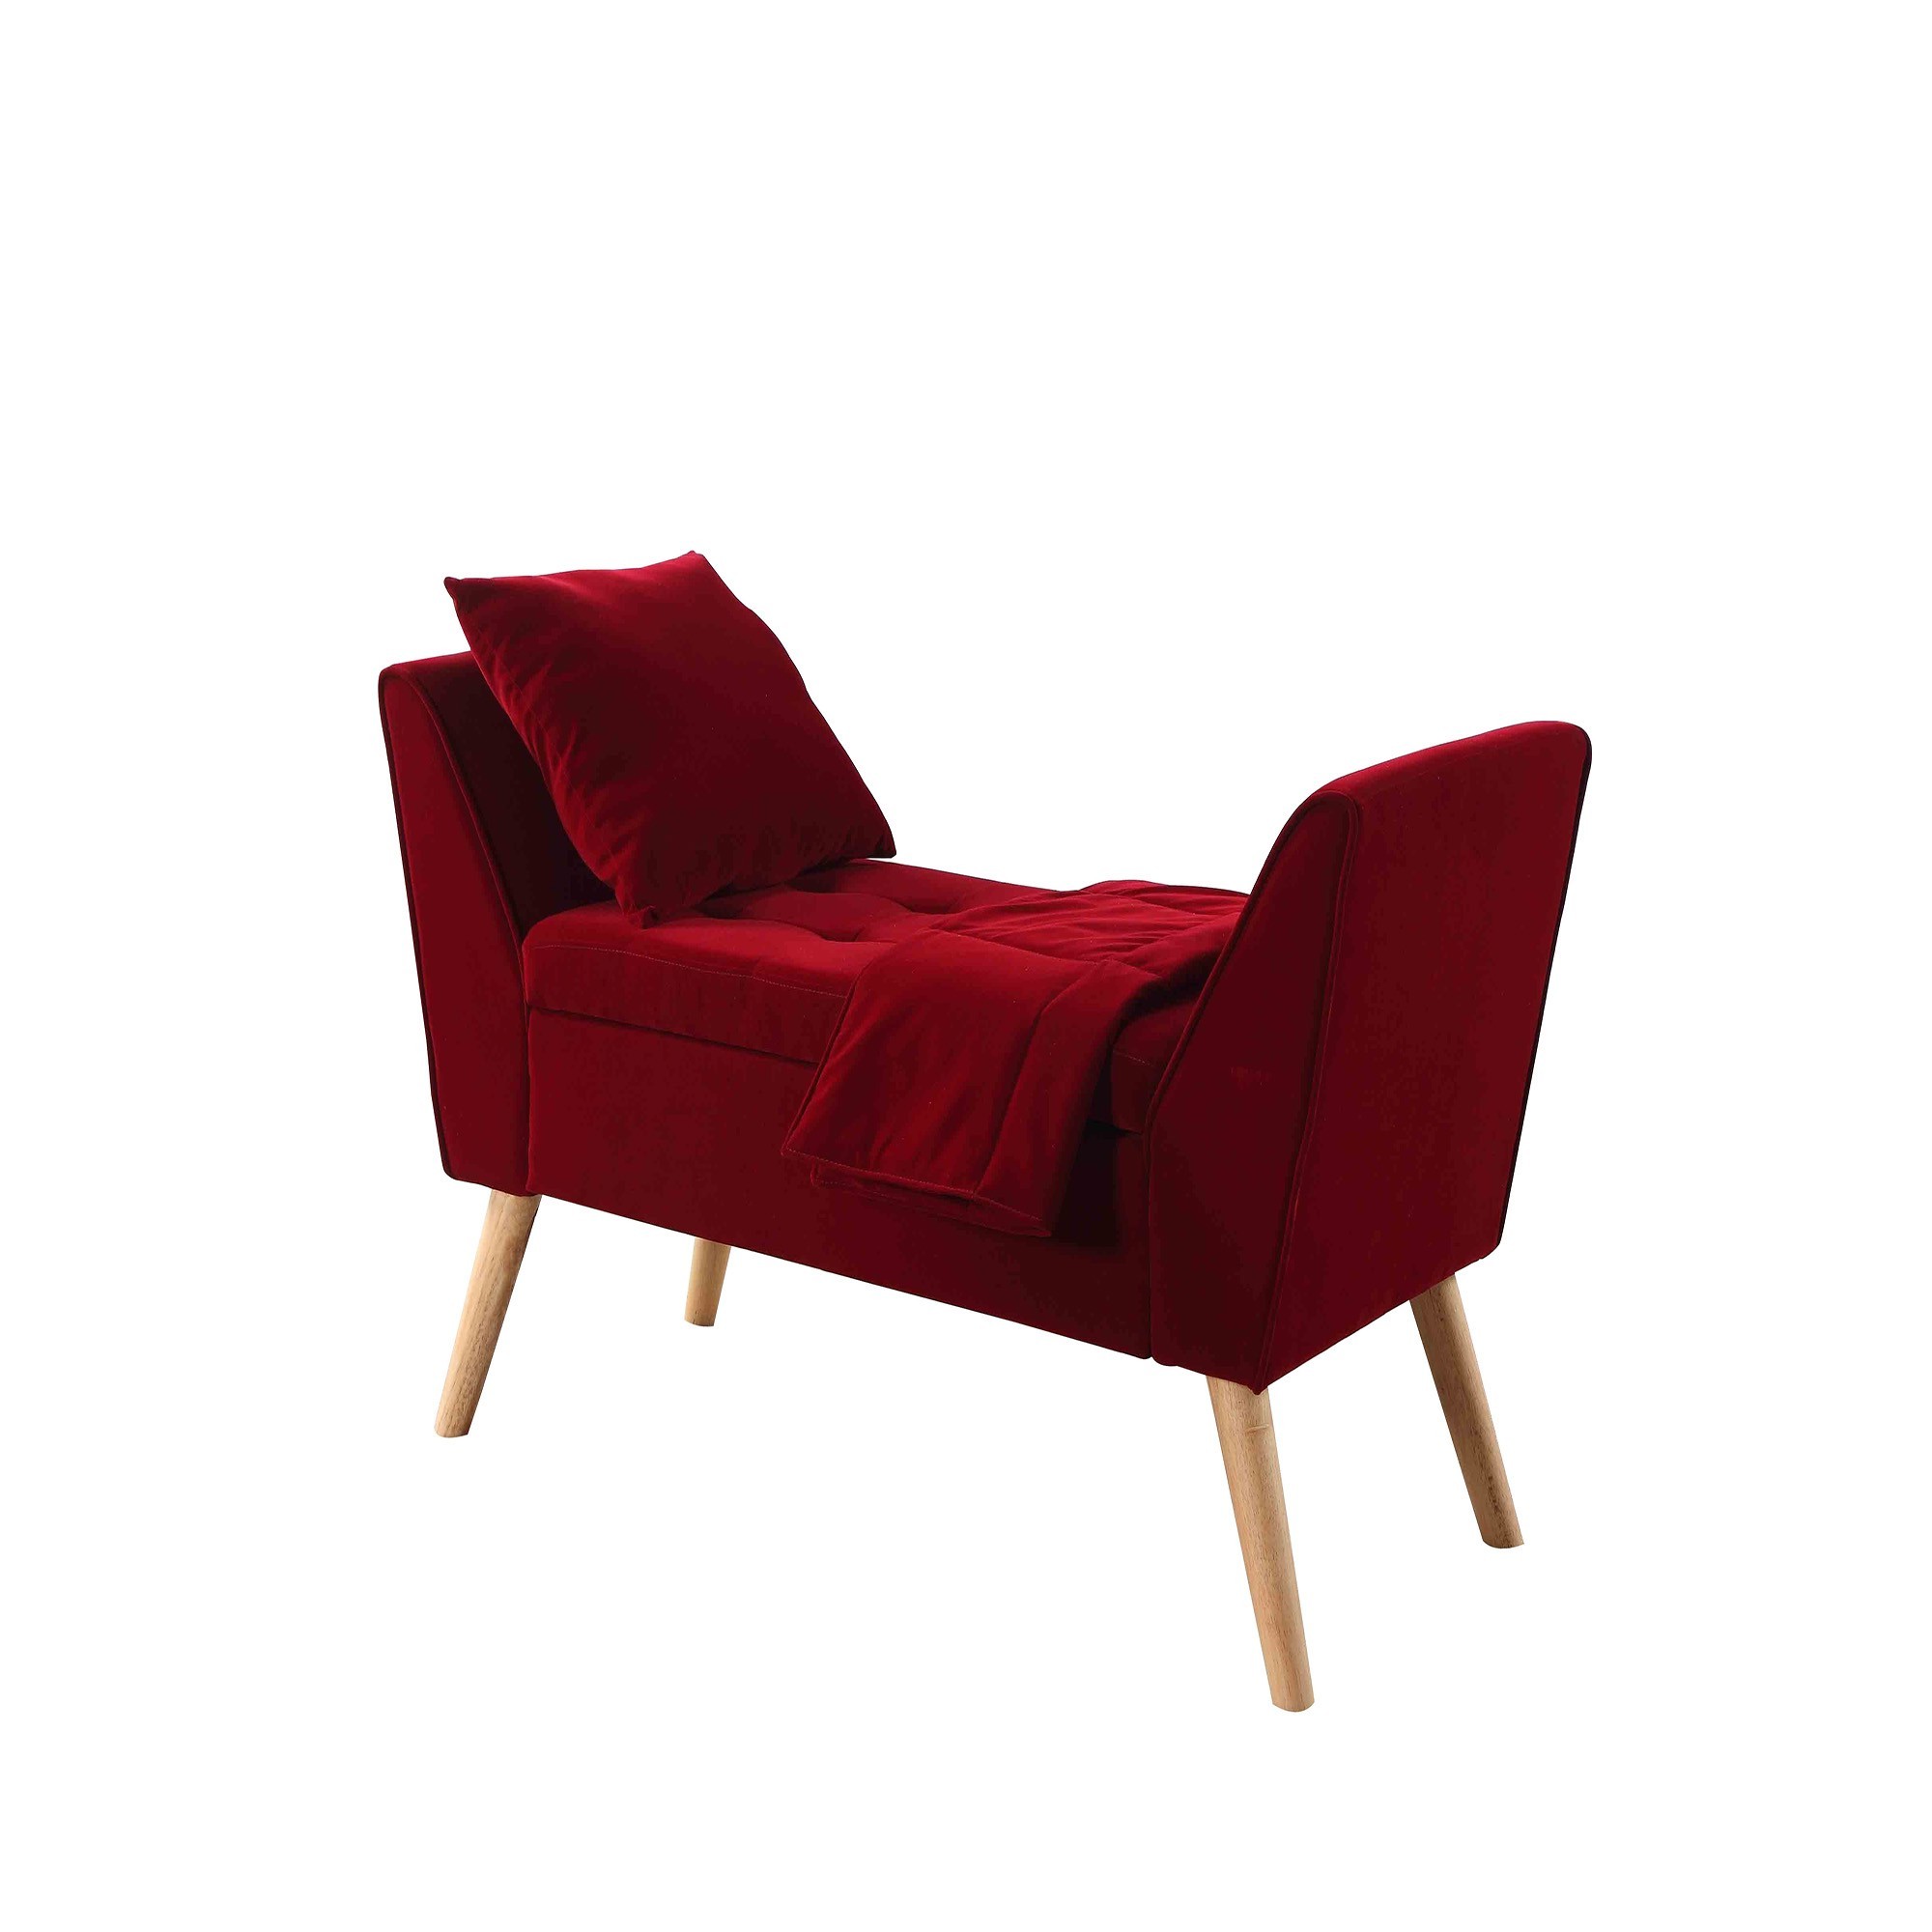 Deep Red Modern Flair Storage Bench with Pillow and Blanket